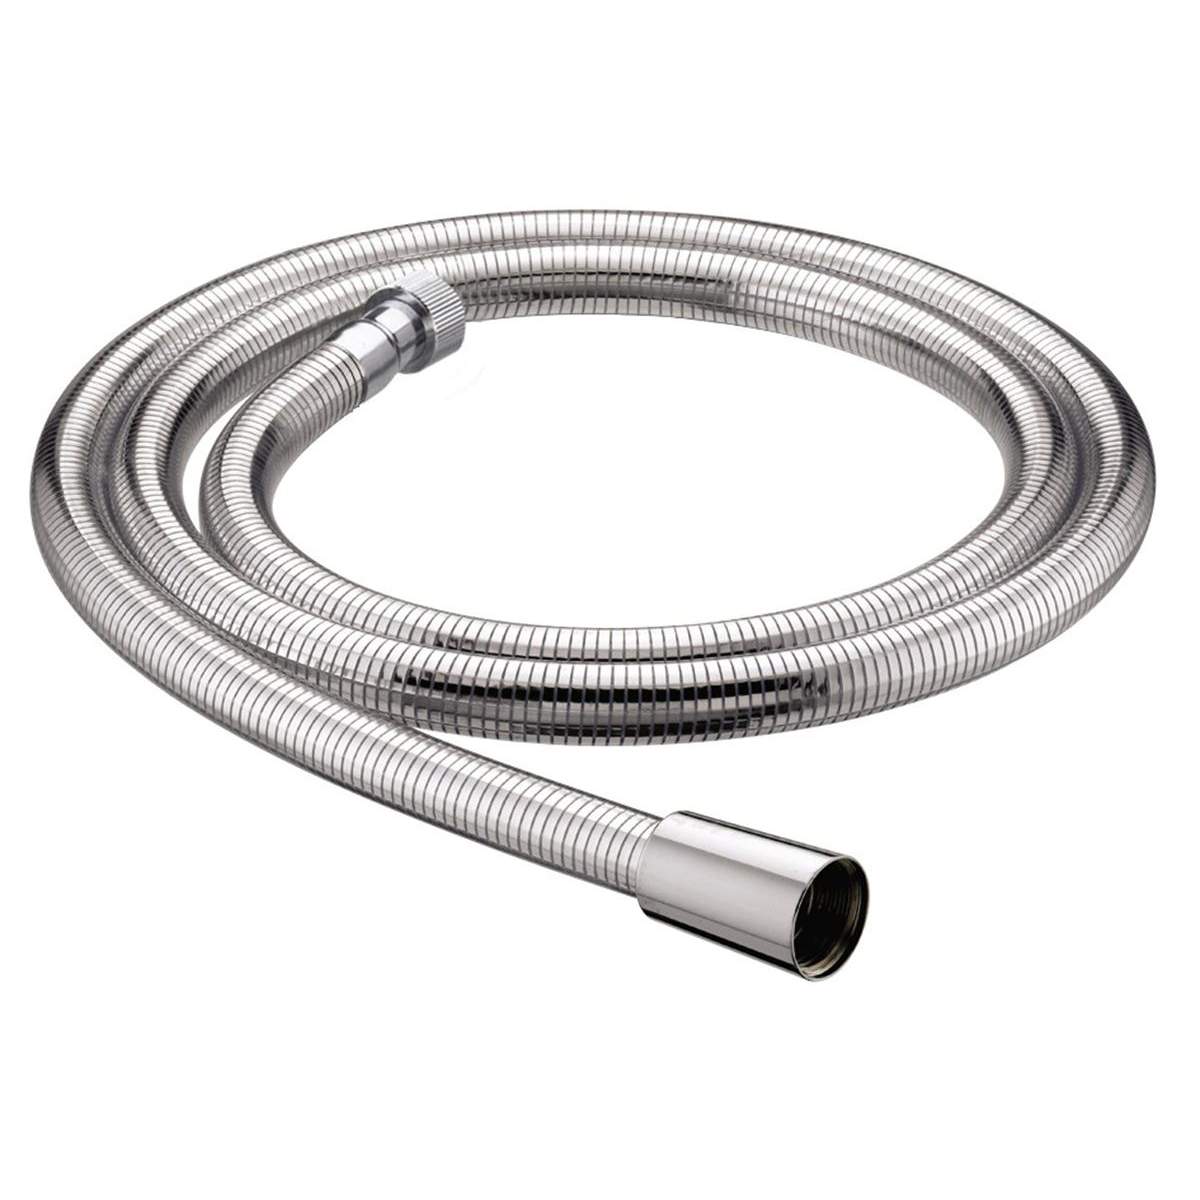 Bristan 1.5m Cone to Nut Easy Clean Shower Hose with 8mm Bore (HOS 150CNE01 C)